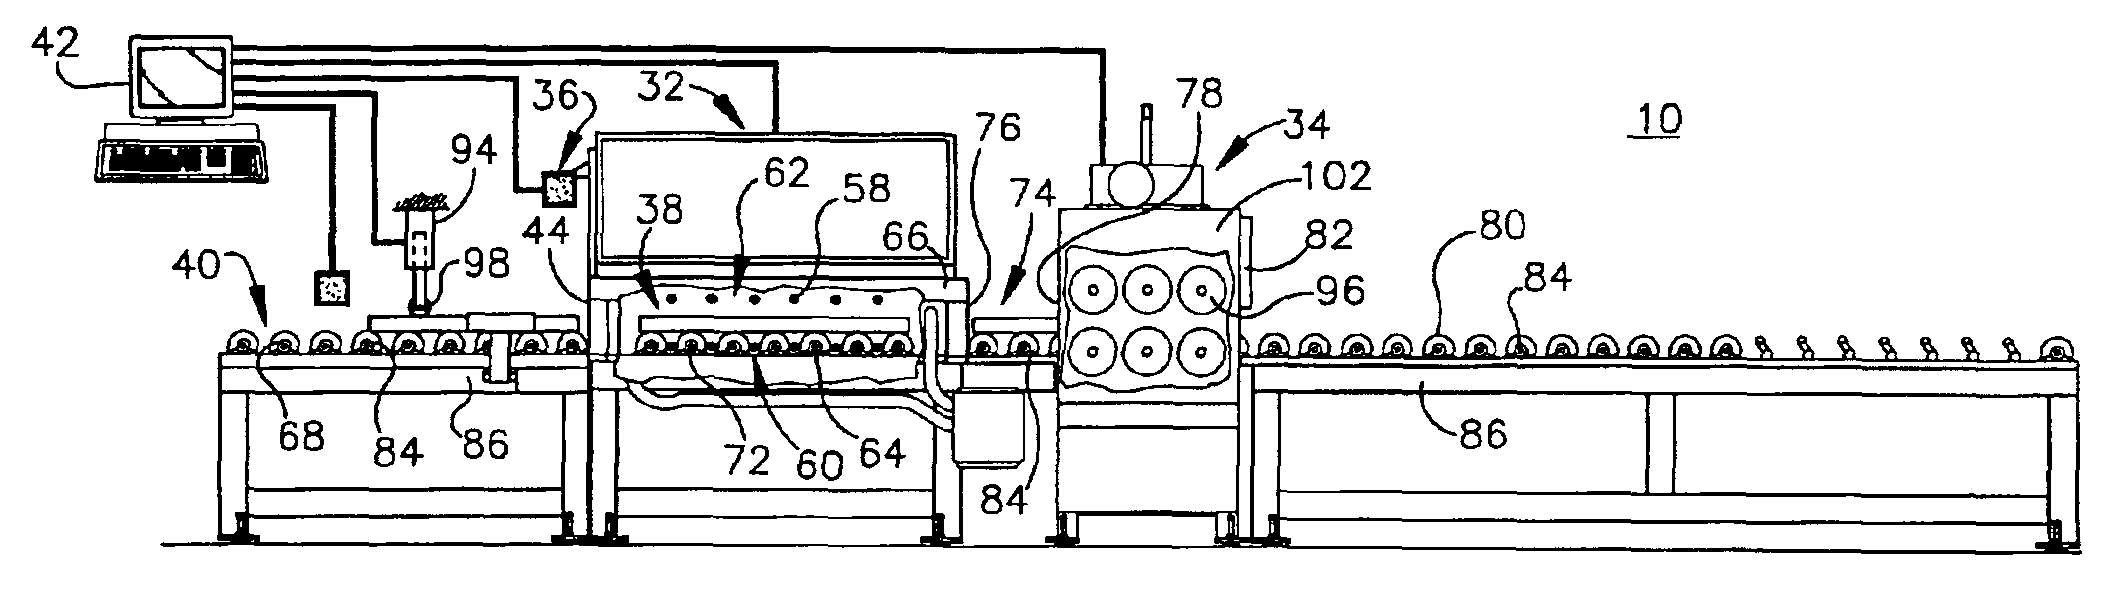 Method and apparatus for processing sealant of an insulating glass unit